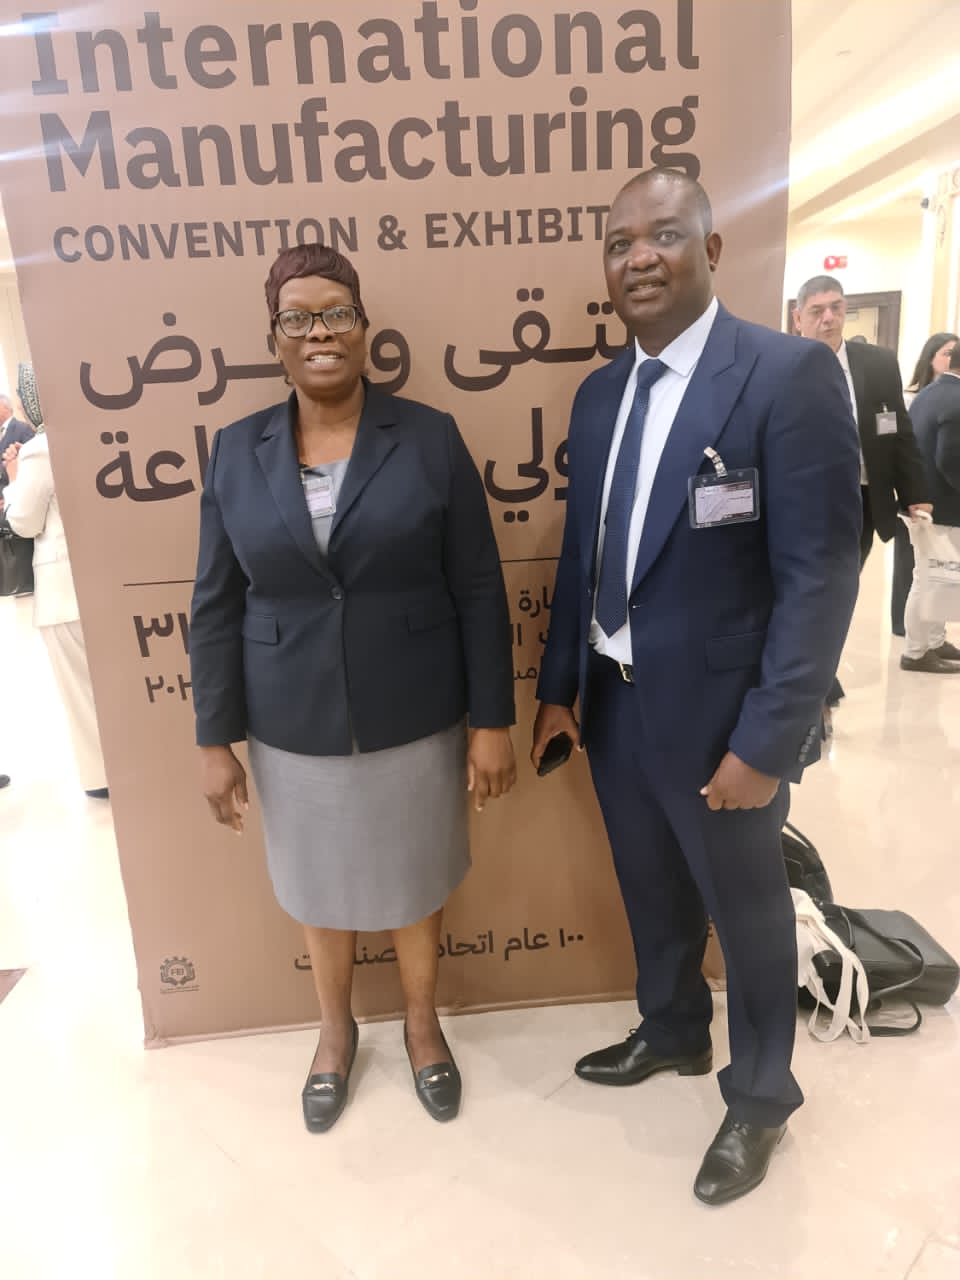 EMCOZ President Mr Demos Mbauya and Executive Director Mrs Nester Mukwehwa attending the Convention in Cairo Egypt 29 October 2022